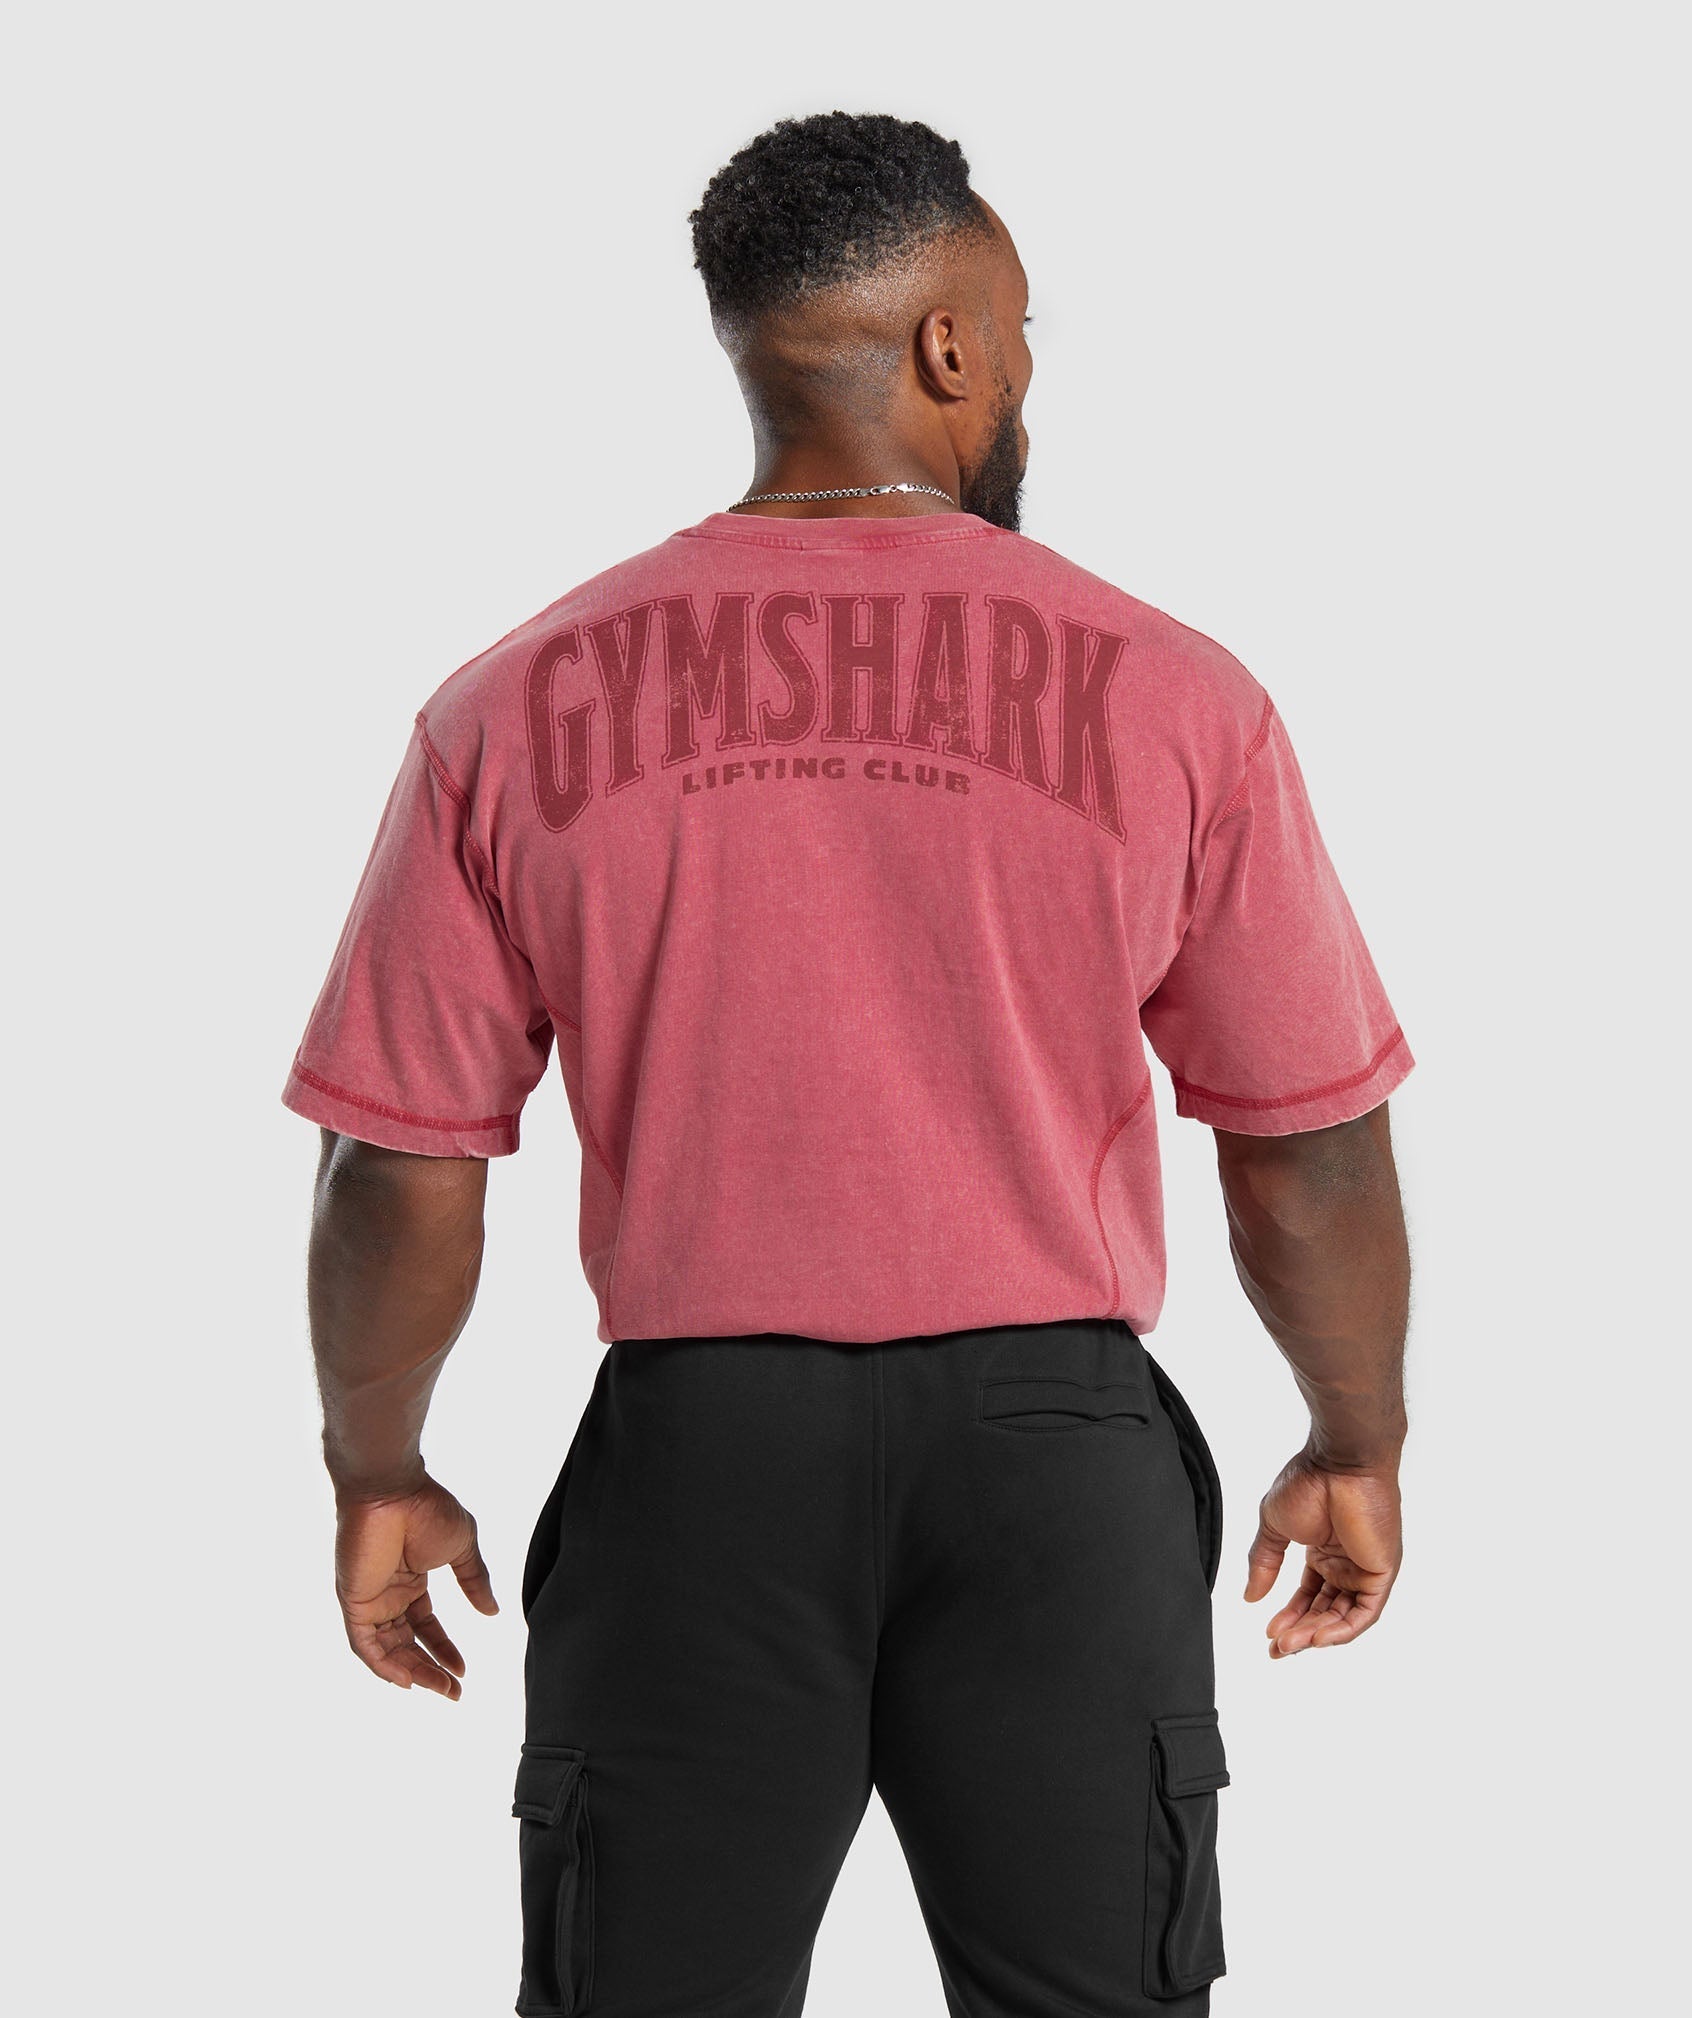 $46 Gymshark washed t-shirt, are they WORTH IT??? 